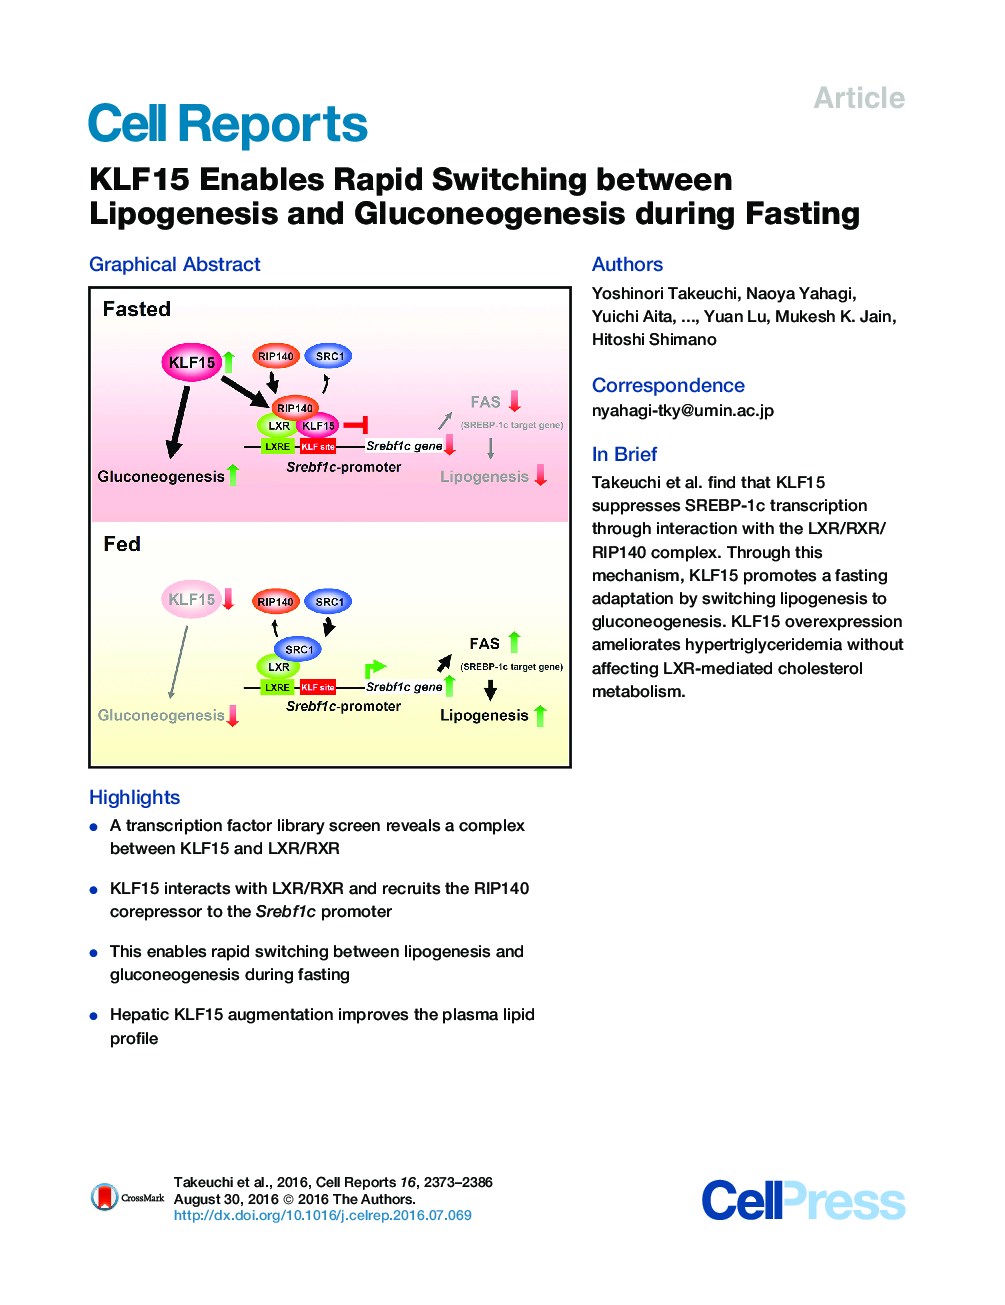 KLF15 Enables Rapid Switching between Lipogenesis and Gluconeogenesis during Fasting